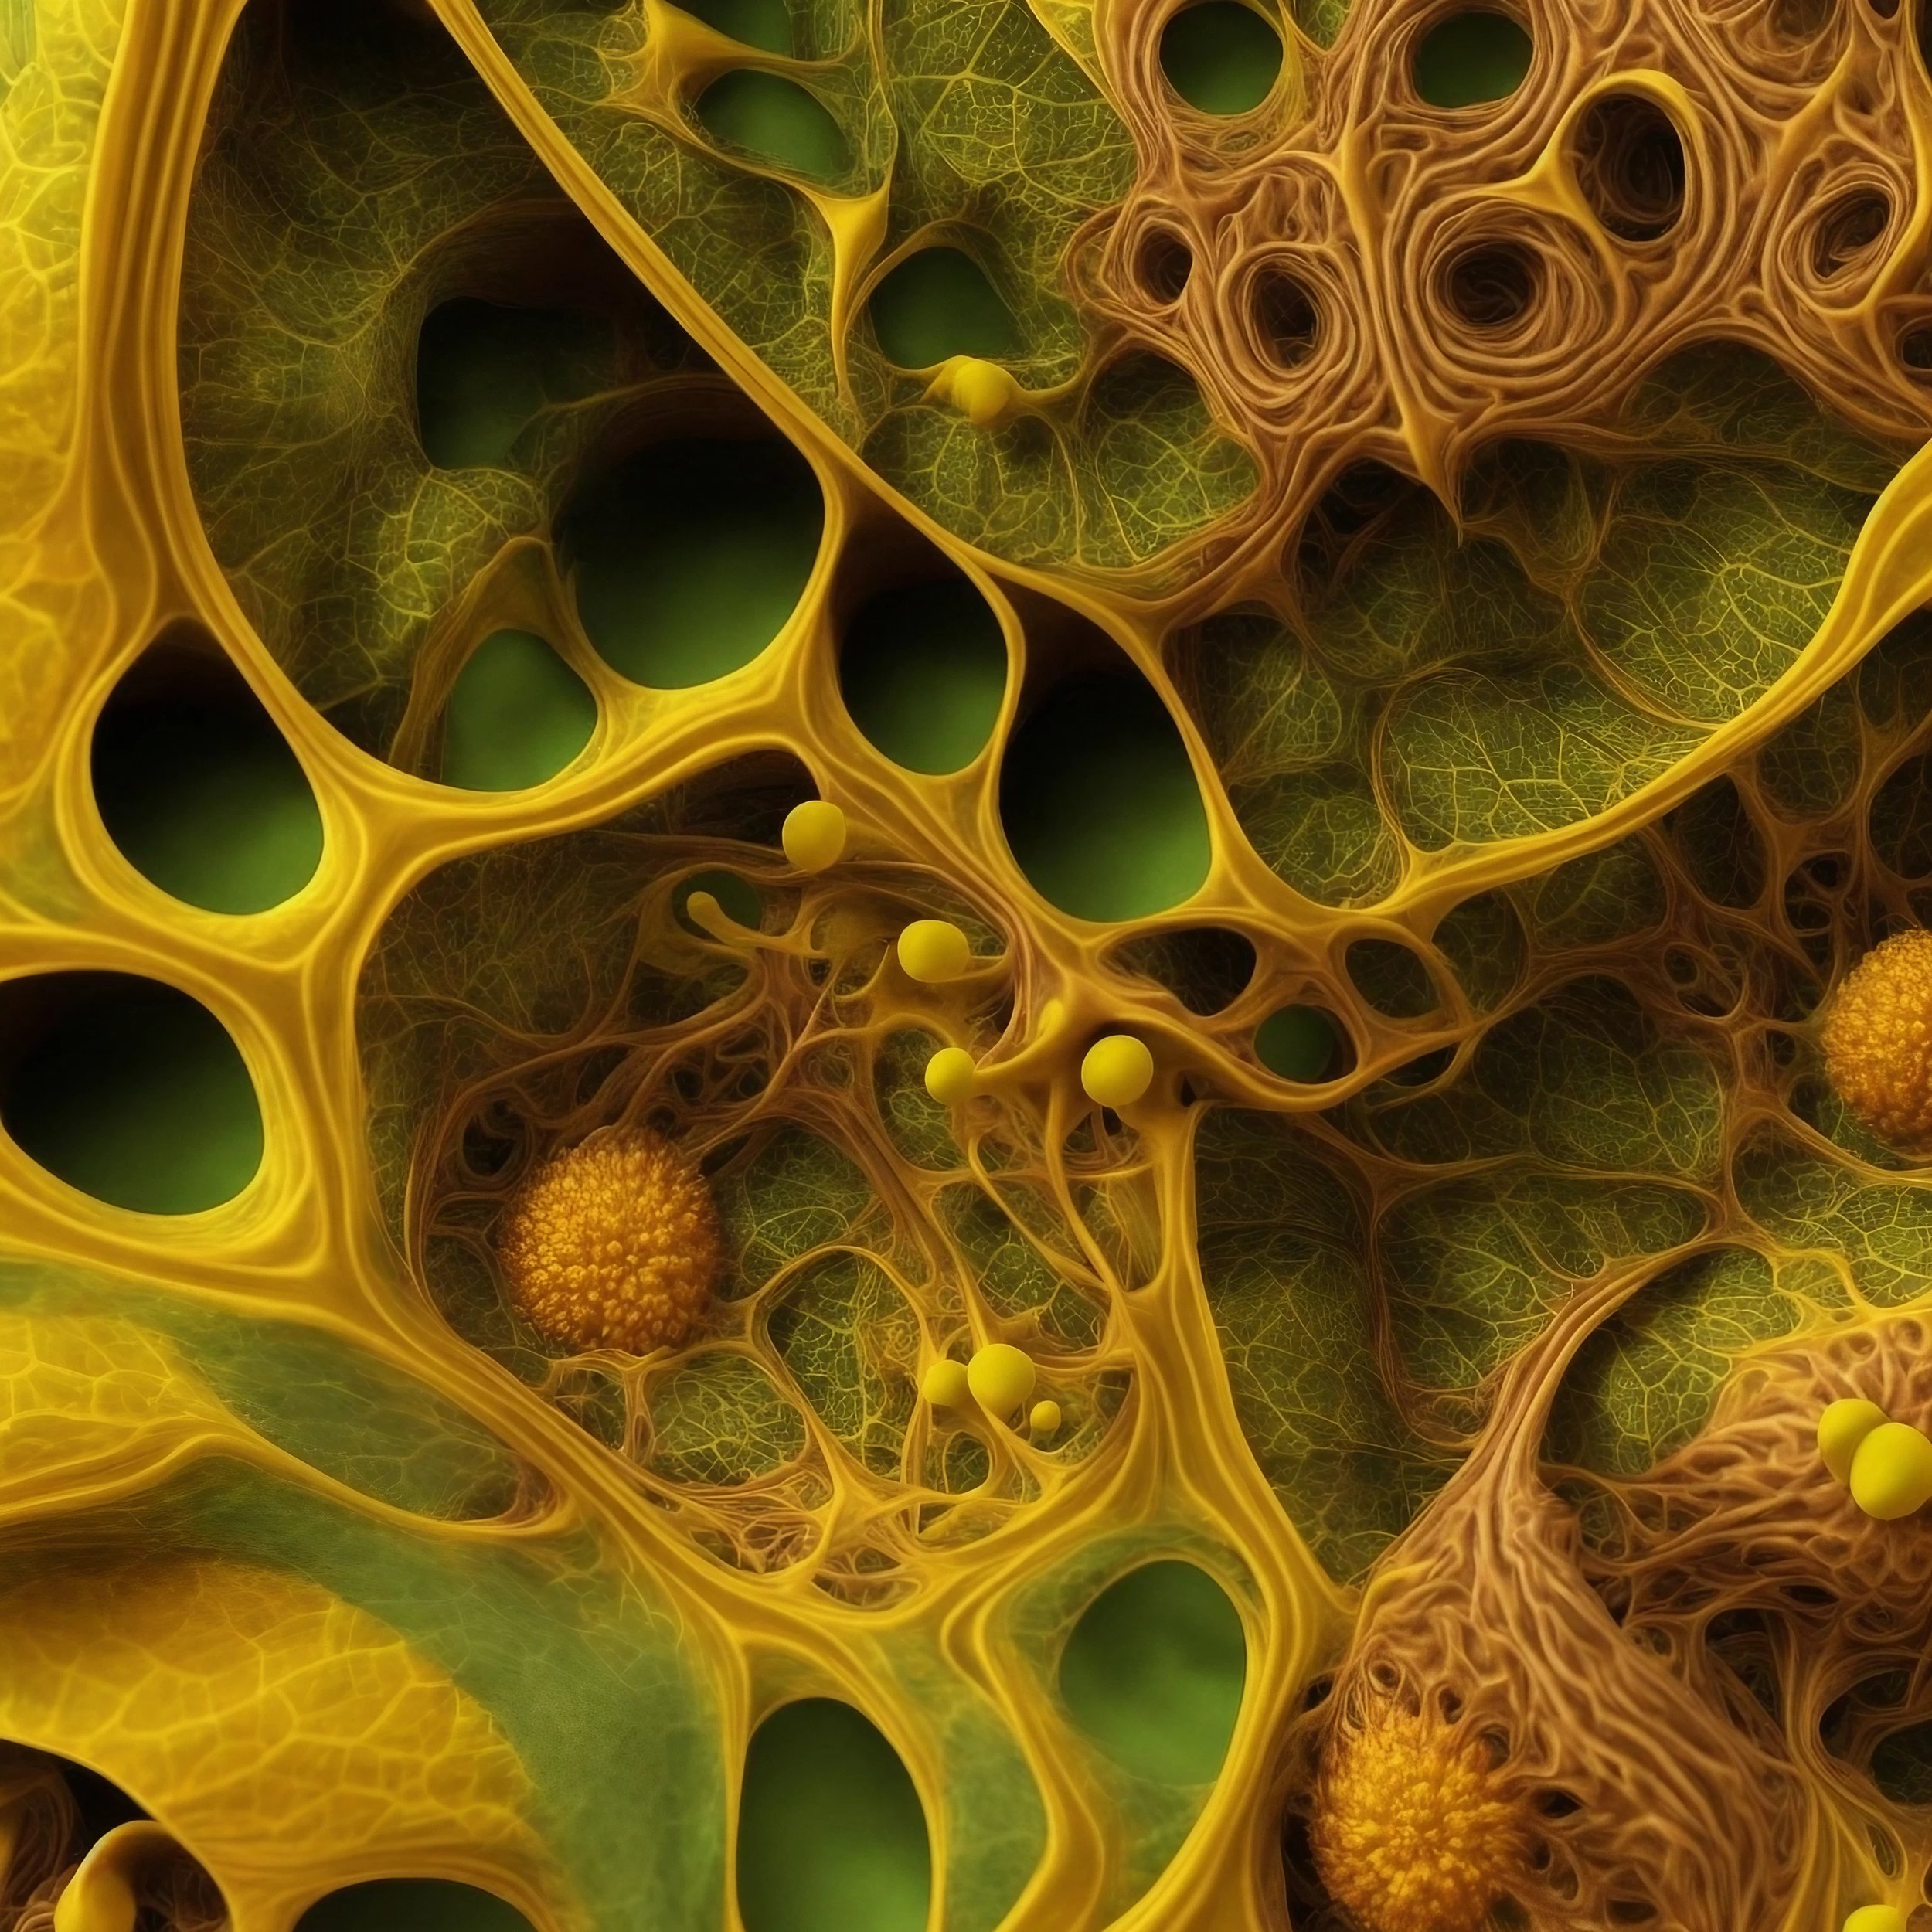 Default_biomorphic_fractals_brown_and_pickle_green_and_mustard_1_clipdrop-enhance.jpg